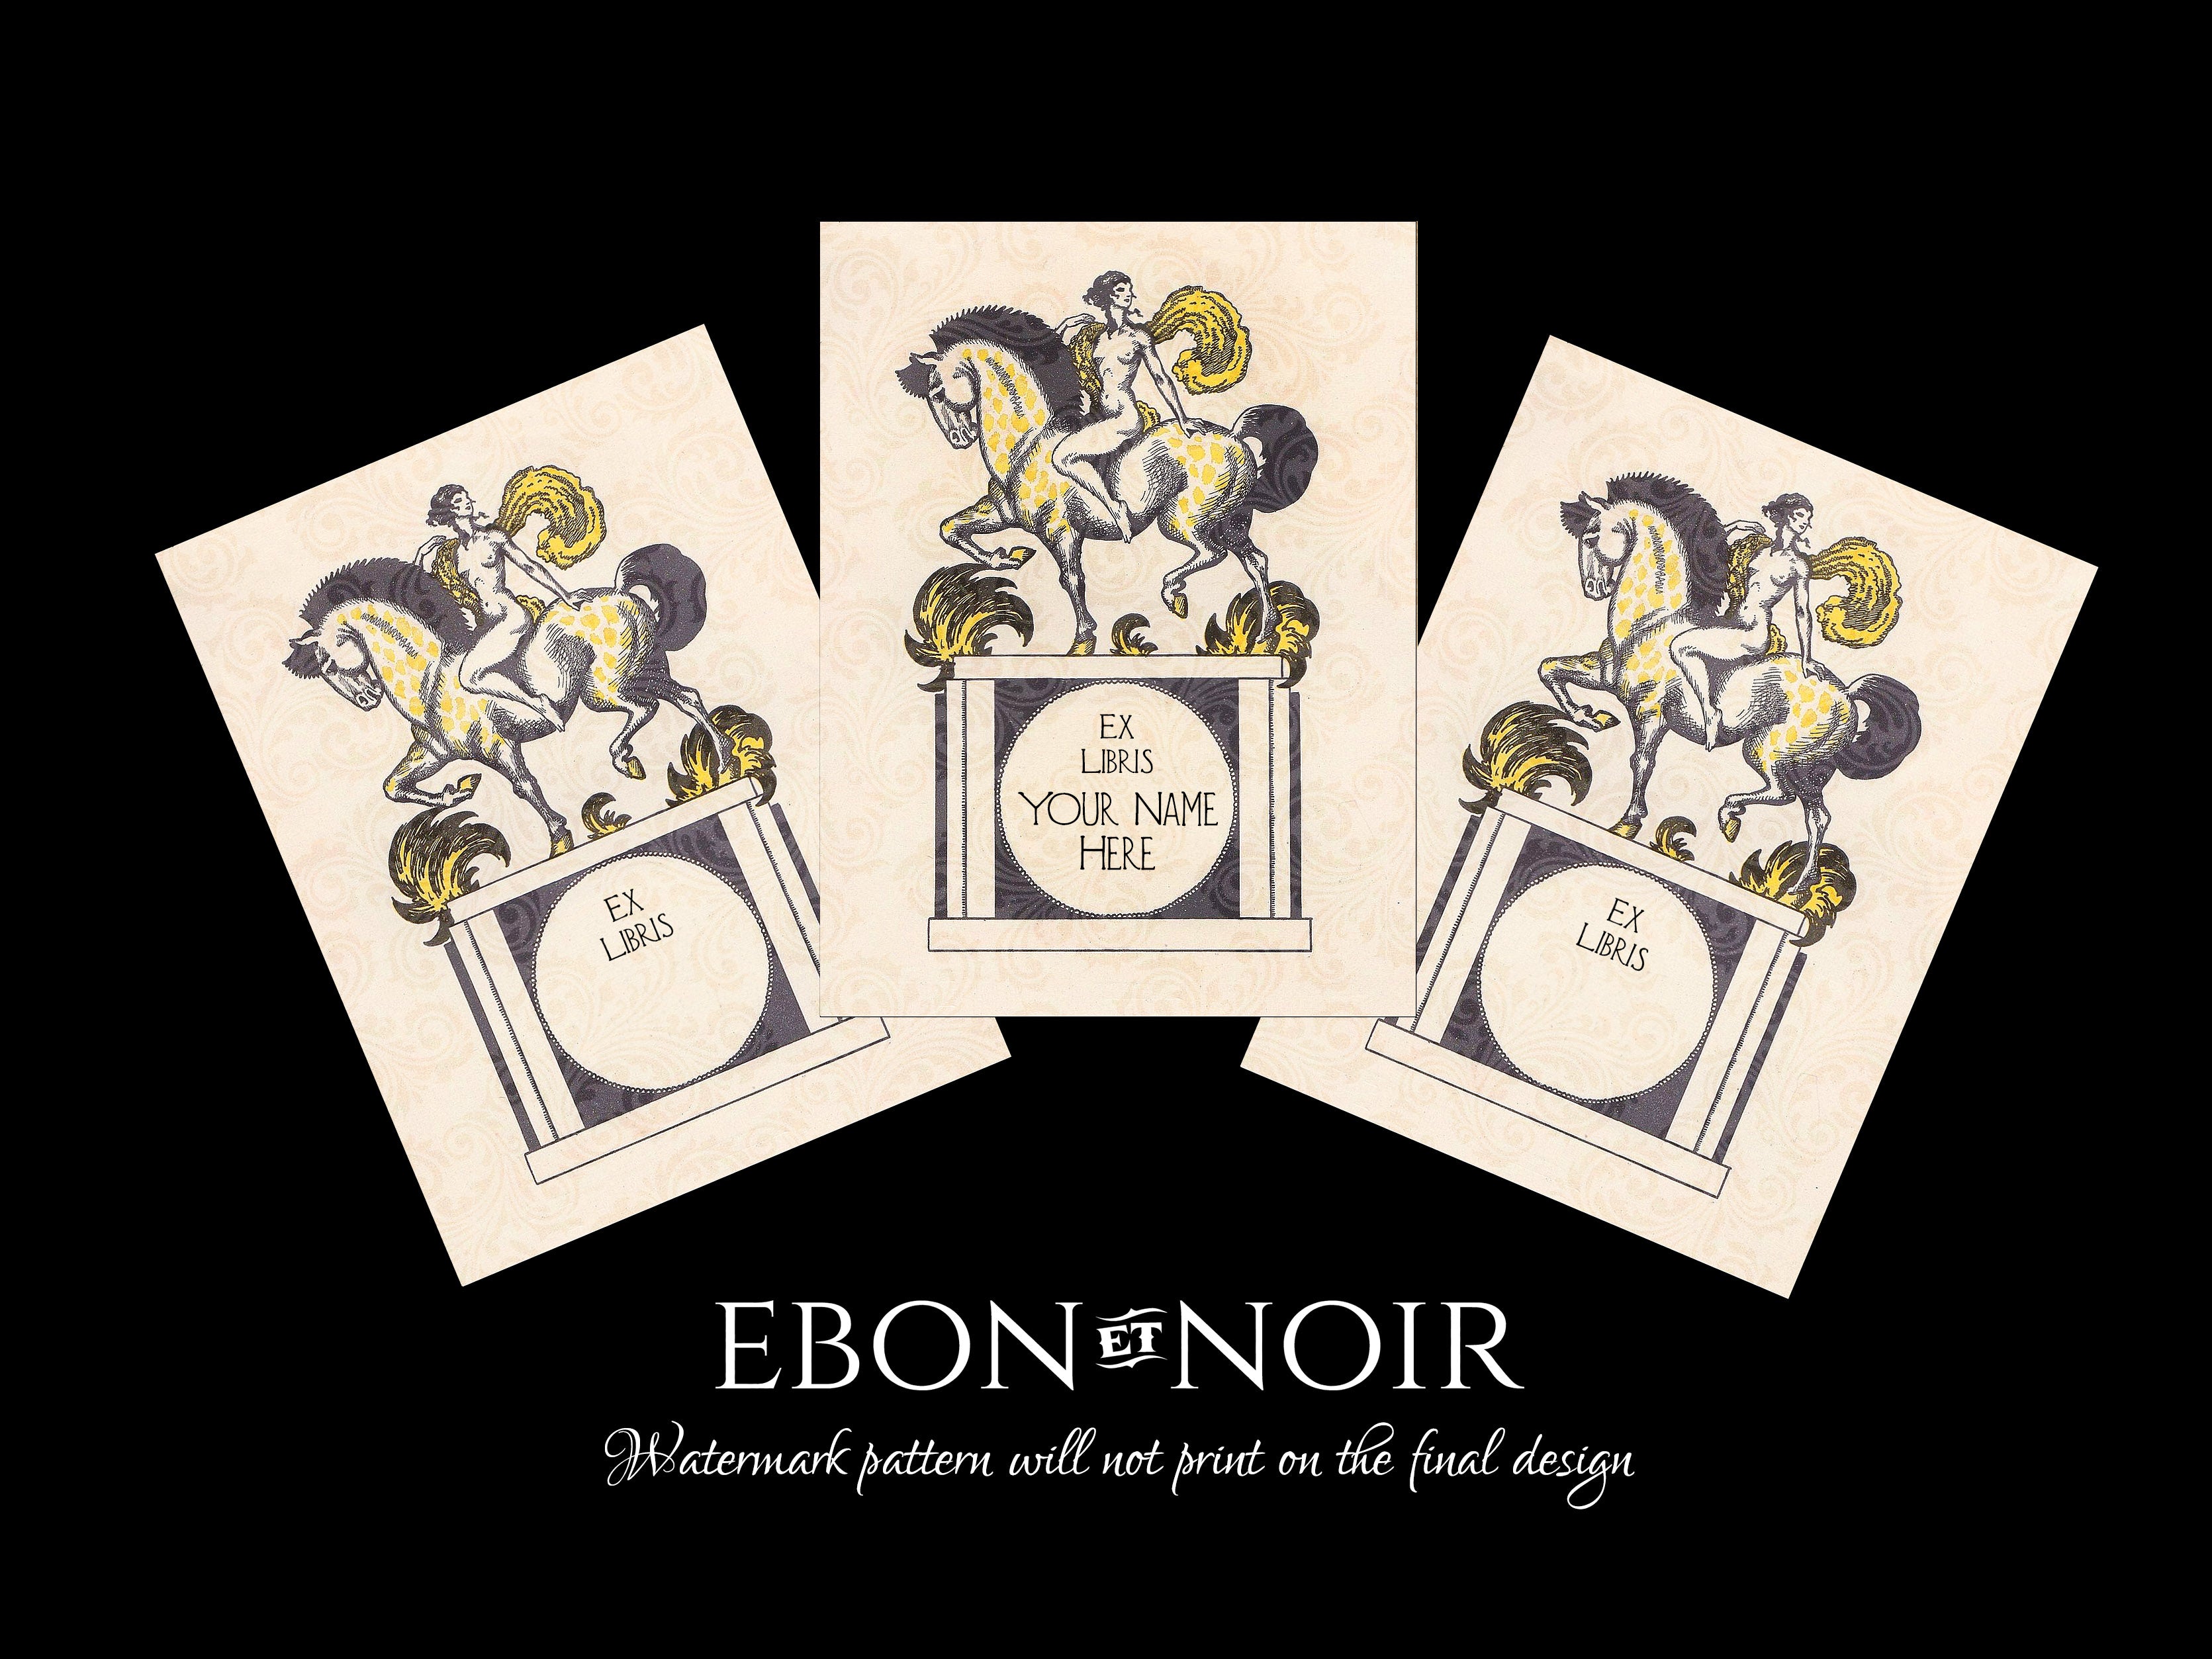 Bareback Horse Rider, Erotic Personalized Gothic Ex-Libris Bookplates, Crafted on Traditional Gummed Paper, 3in x 4in, Set of 30